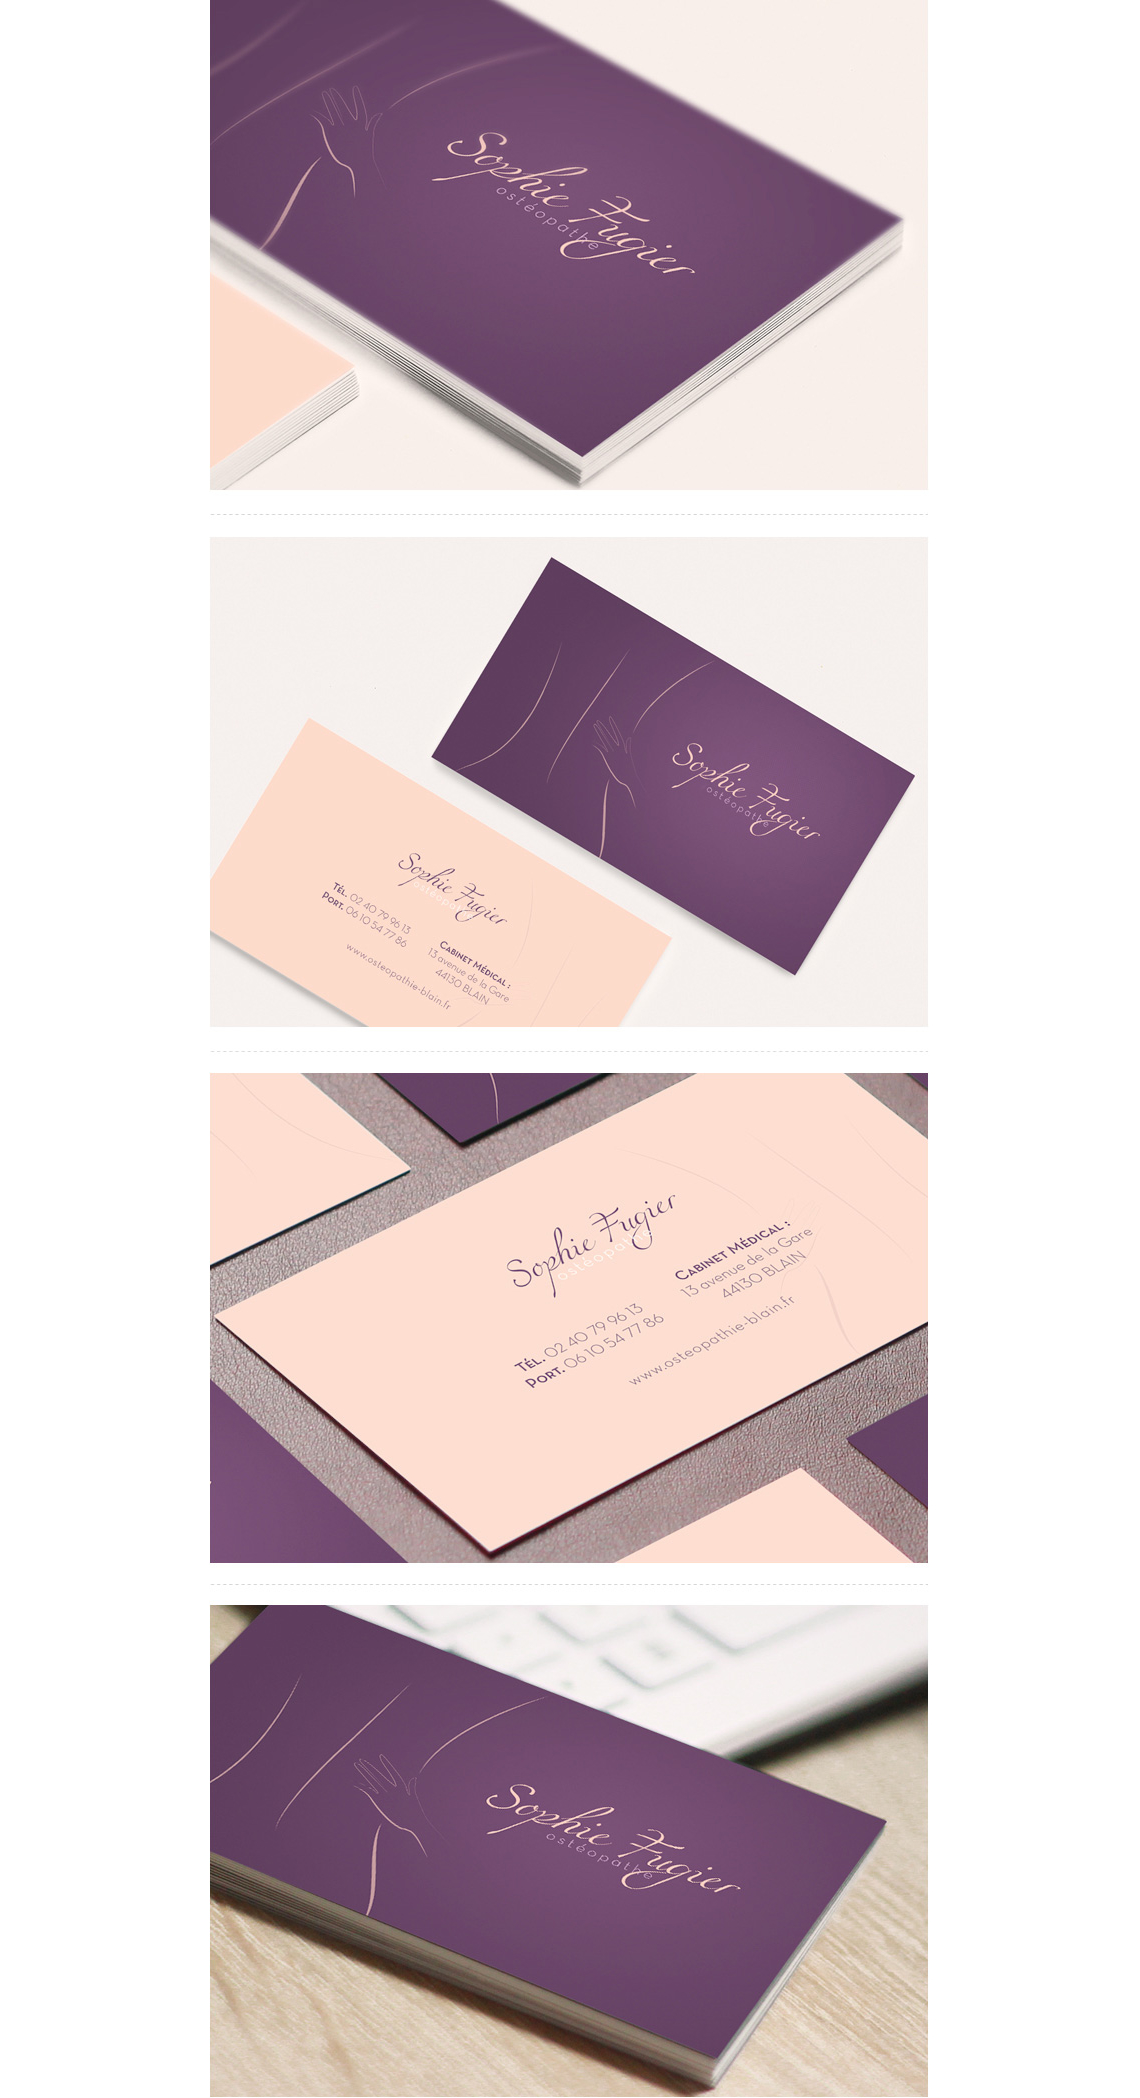 Details business card of Sophie Fugier, Do osteopath